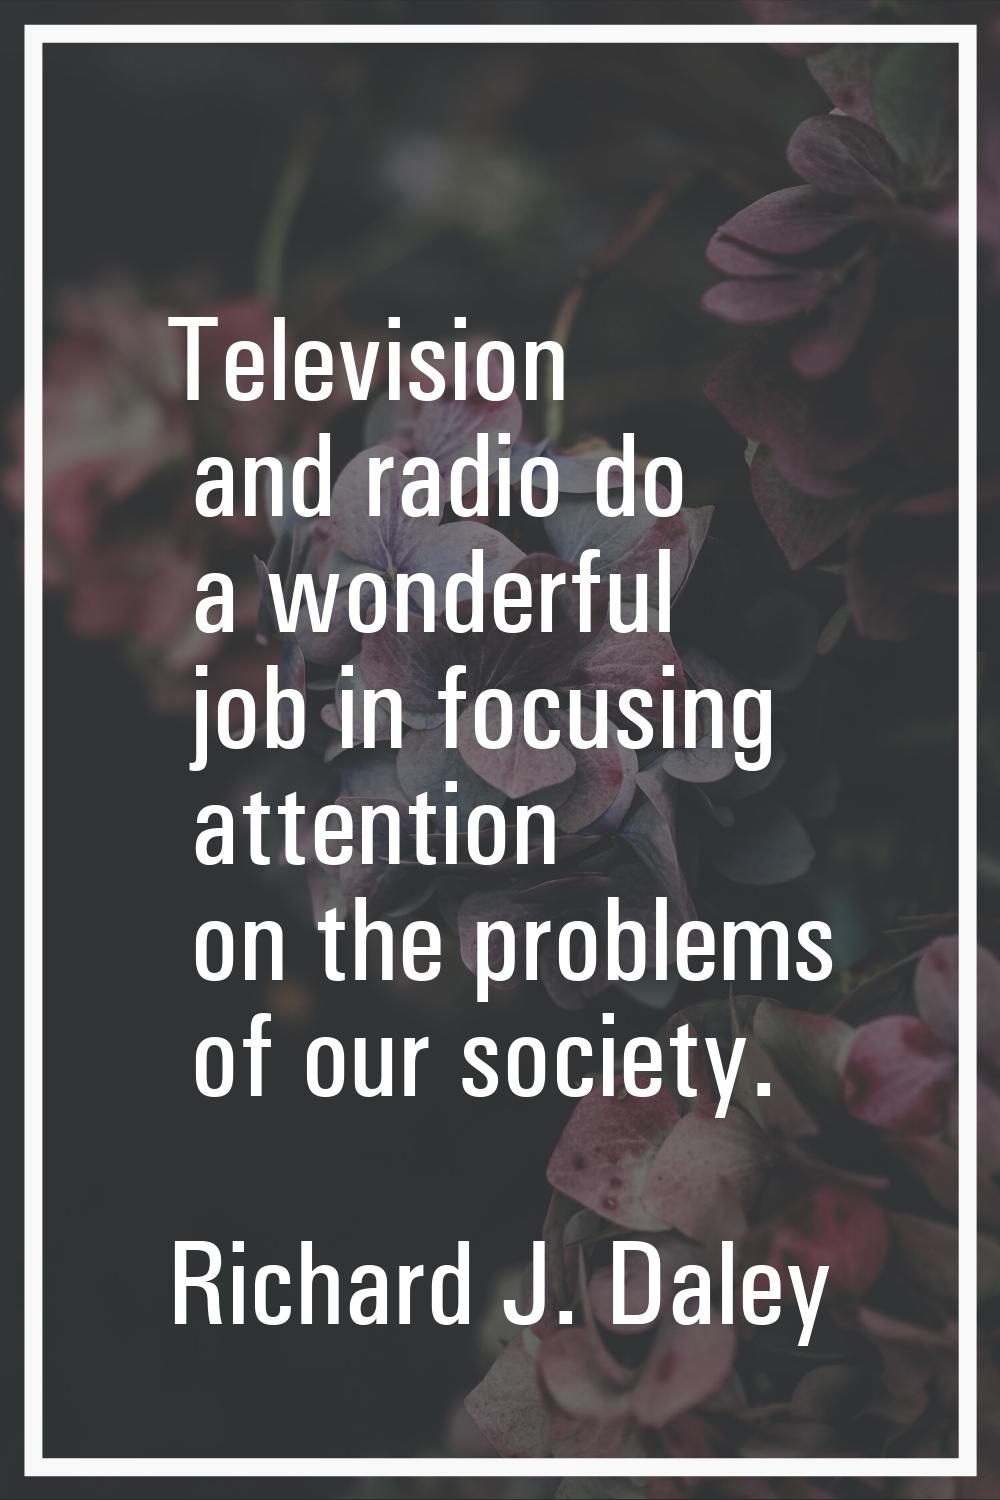 Television and radio do a wonderful job in focusing attention on the problems of our society.